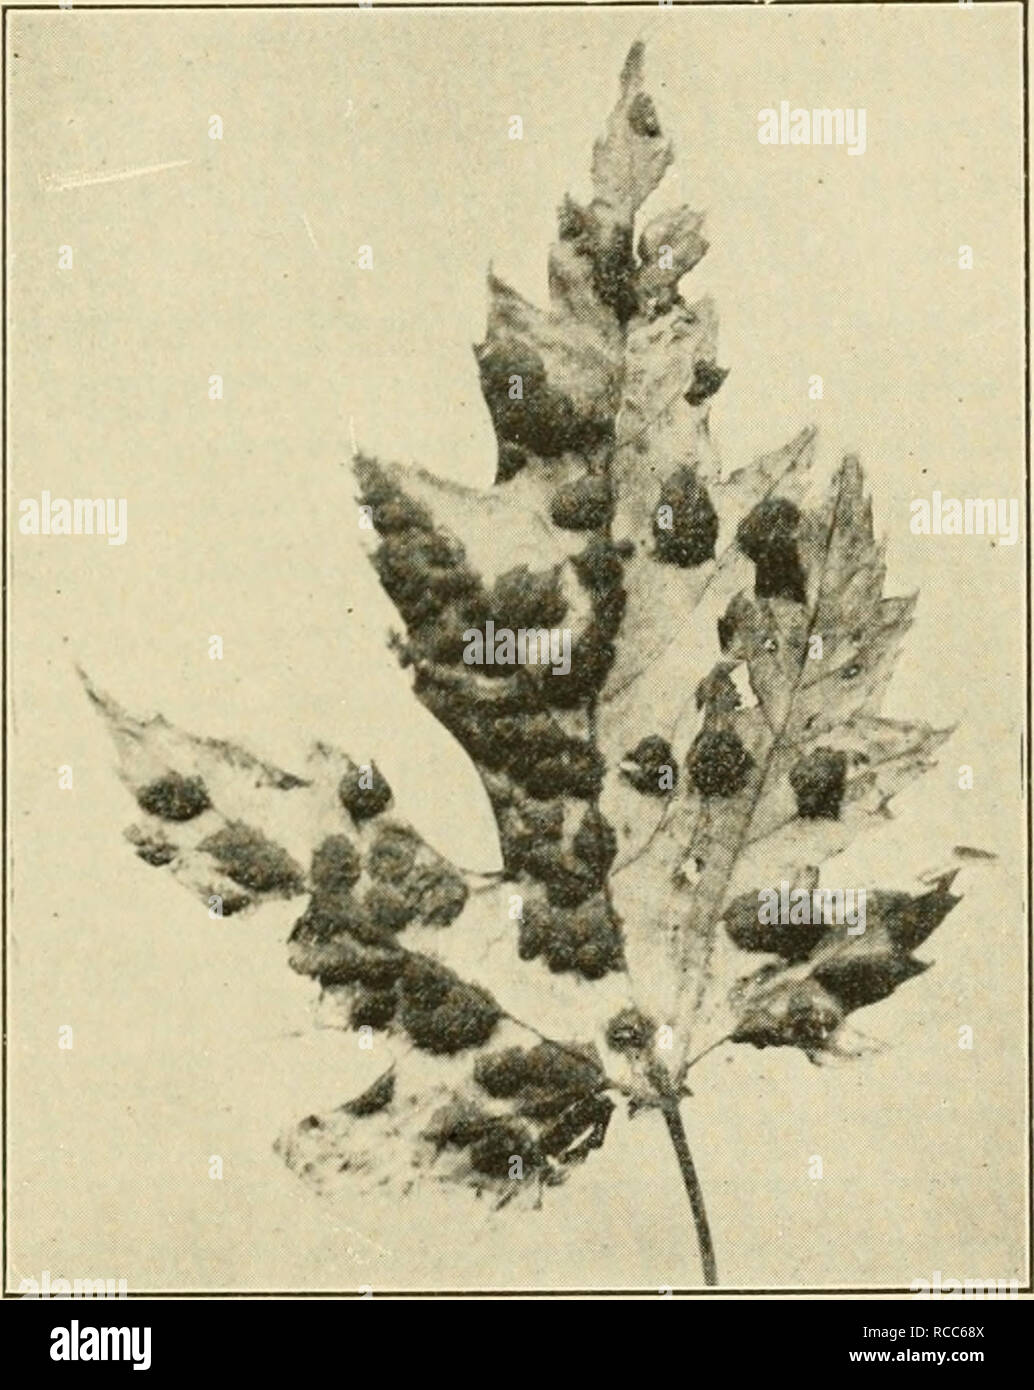 . Diseases of economic plants. Plant diseases. Trees and Timber 393 and die as though frosted. Young leaves and shoots are killed and by their death induce abnormal branching, result- ing in a compact head. The disease seems limited to young trees. Bordeaux mixture is advised — three or more sprayings.. Fig. 208. — Maple tar-spot. After Heald. Thrombosis (Verticillium).—-Leaves wilt and branches die due to plugging of the veins by the fungus. Dark streaks show in the wood of affected twigs. MULBERRY Blight (Bacterium niori B. &amp; L.). —Upon the leaf small, reddish-brown spots, pellucid when  Stock Photo